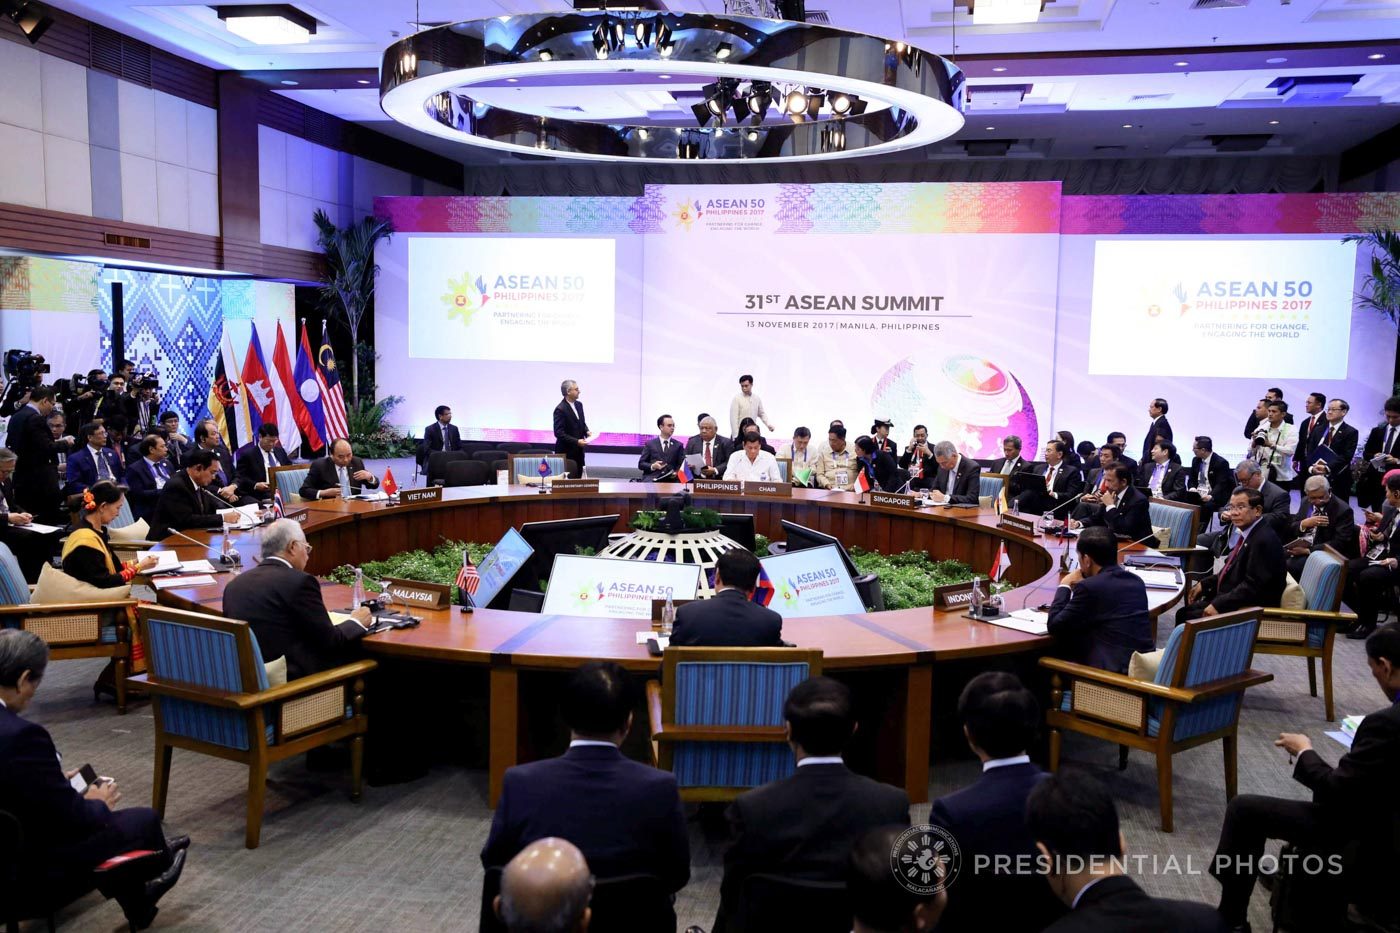 COUNTER-TERRORISM. Commitments to fight radicalization is one of the outputs of the 31st ASEAN Summit. Presidential photo  